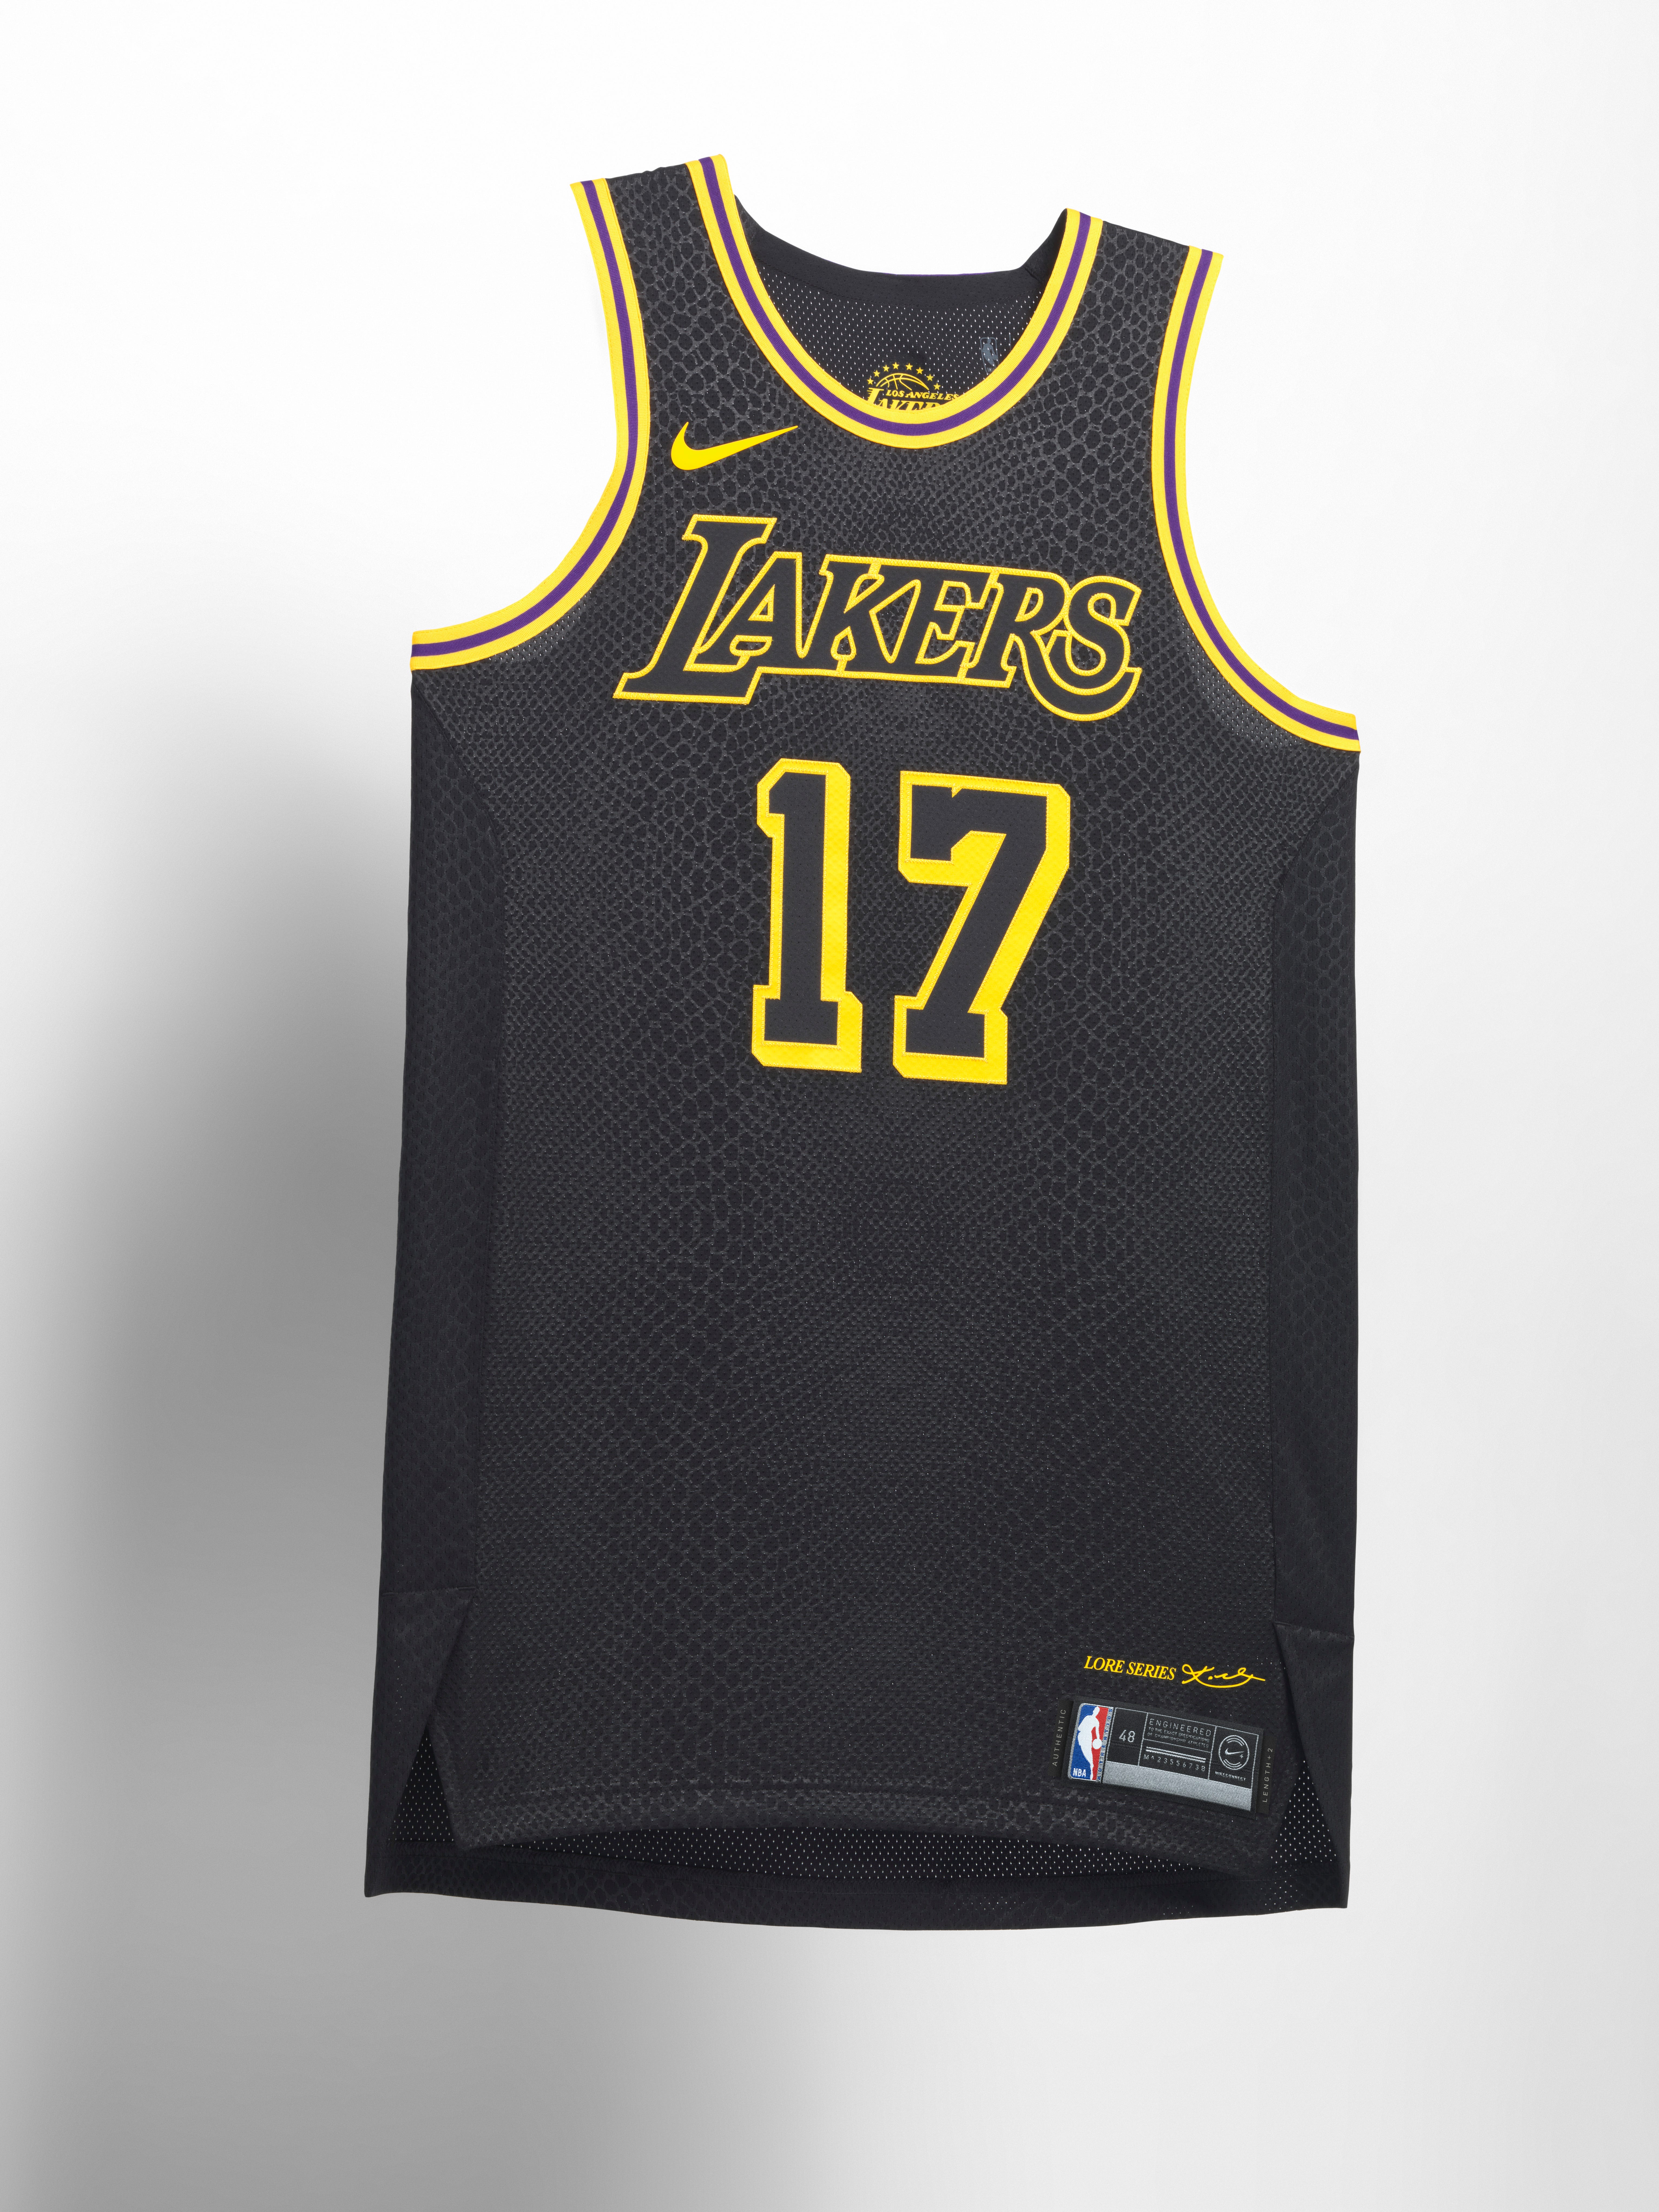 lakers authentic city edition jersey